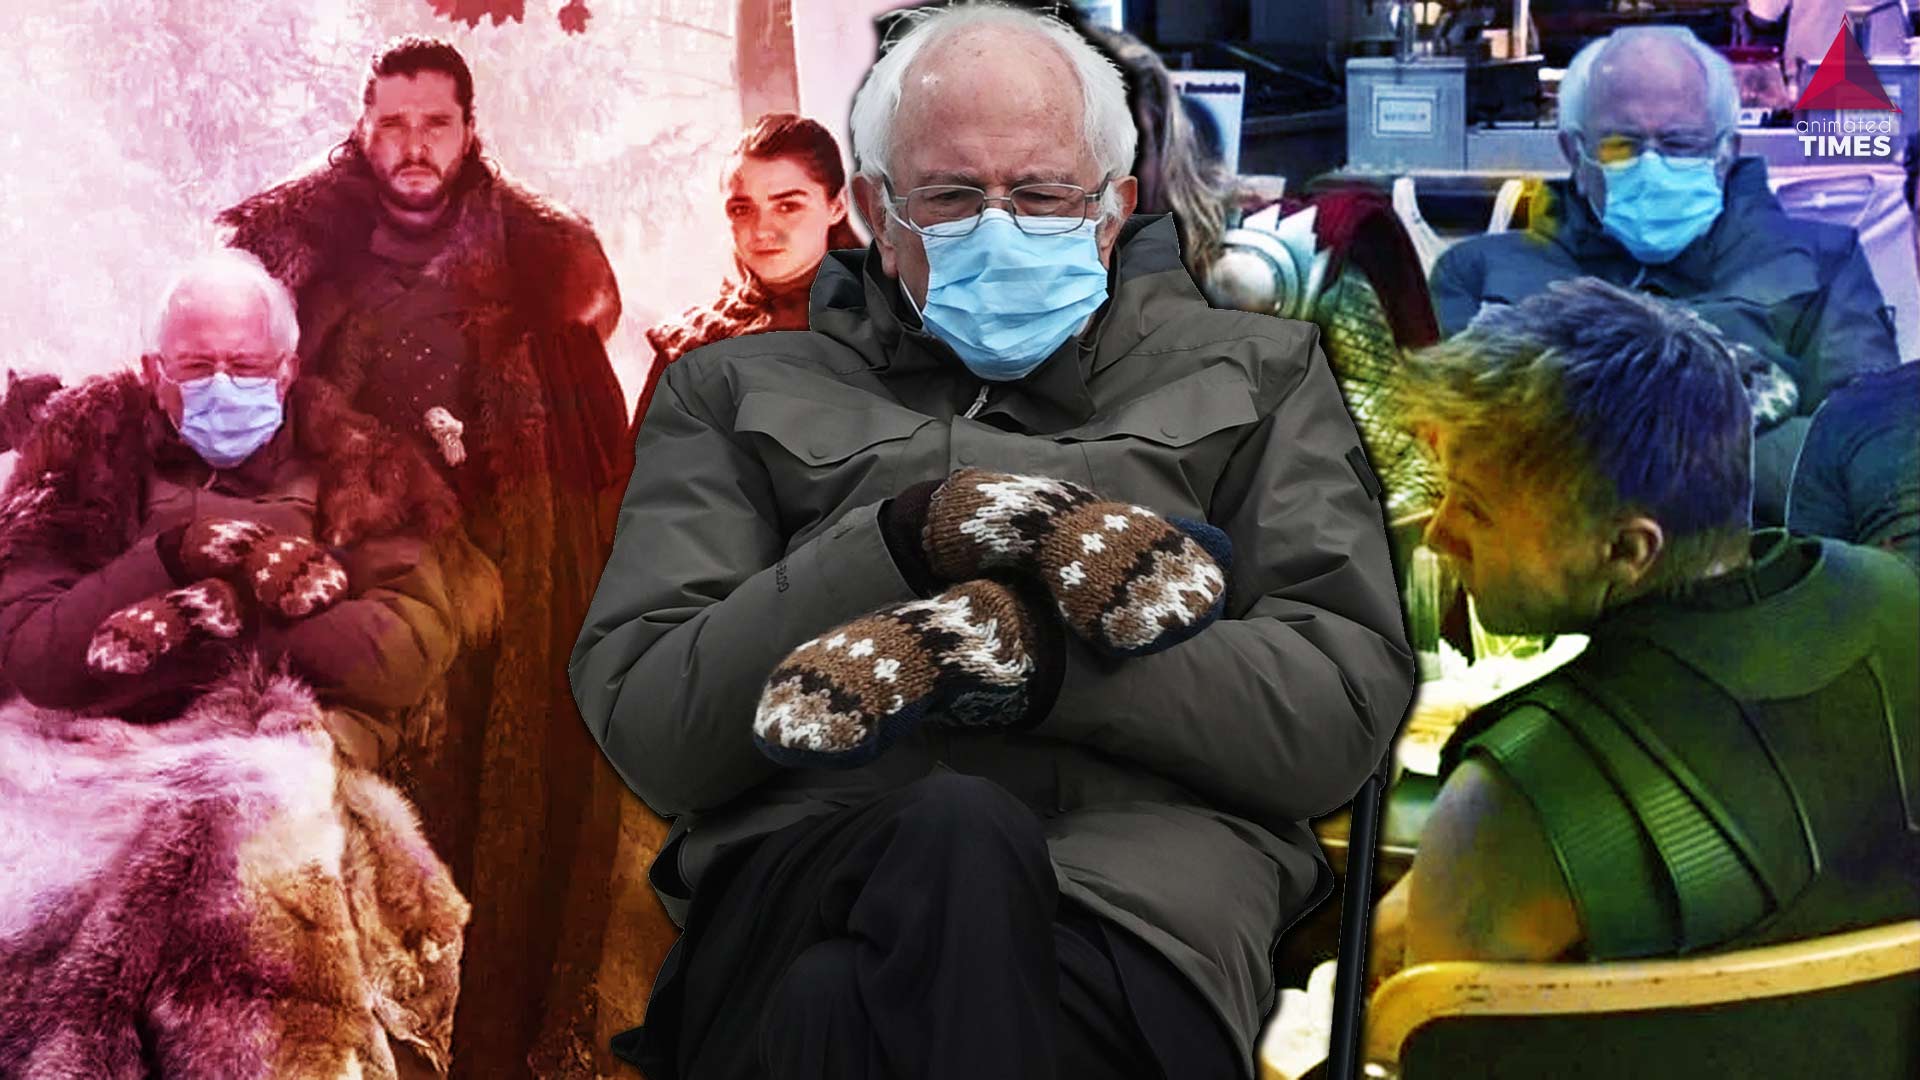 The Bernie Sanders Mittens Memes Has Recently Attacked The Pop Culture